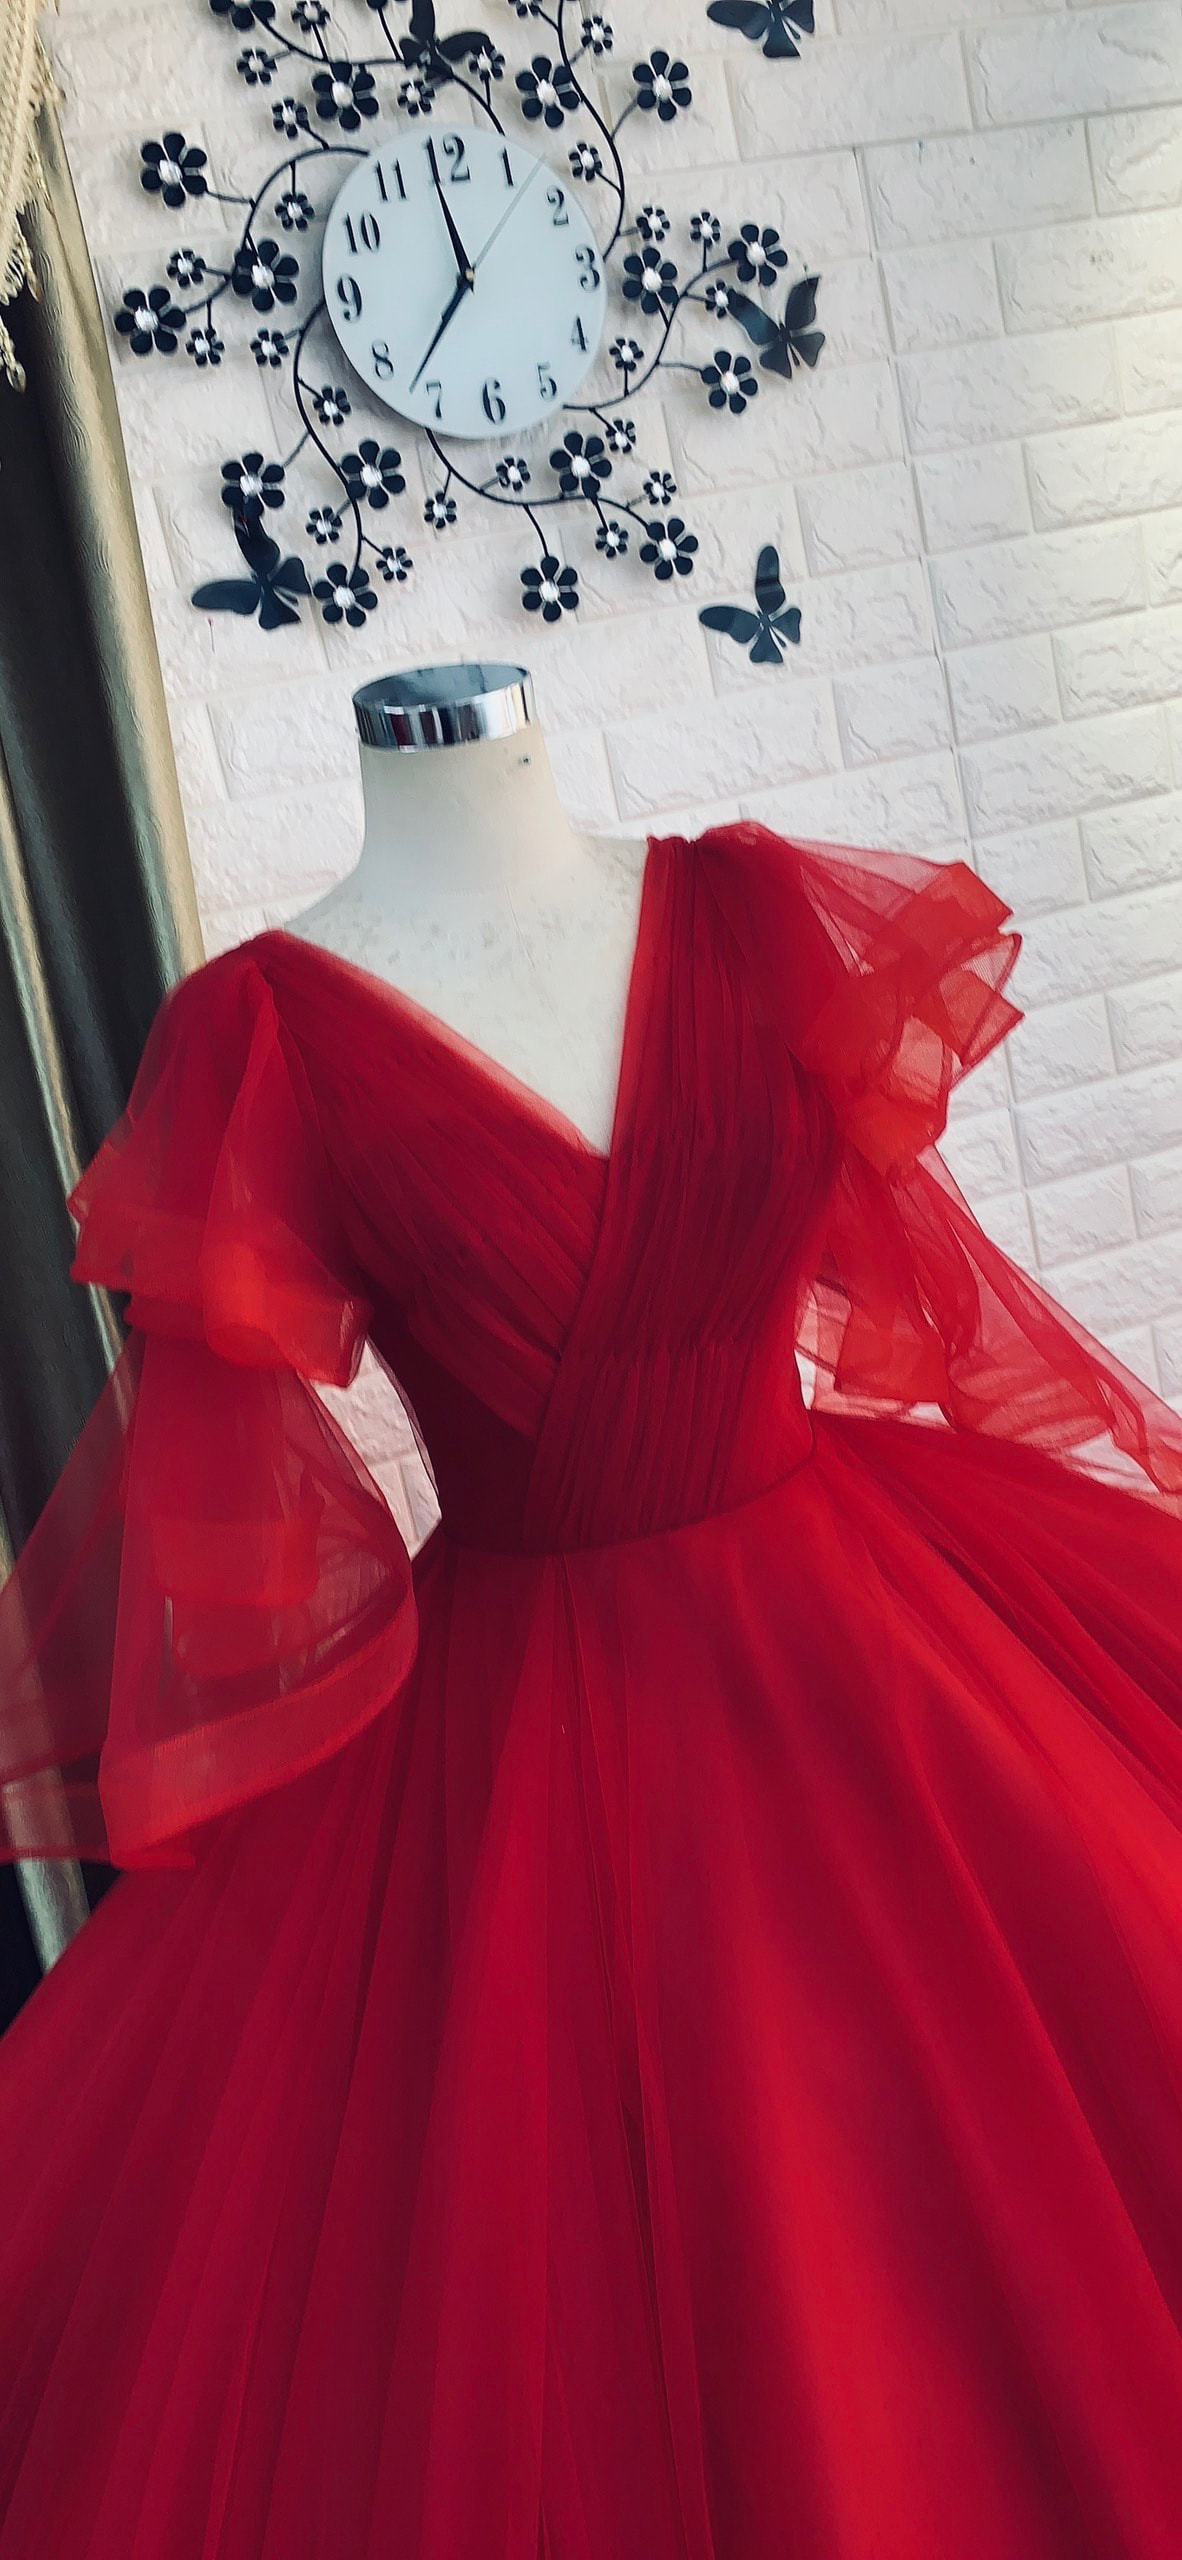 Bright red off the shoulder full tulle wedding ball gown dress ...